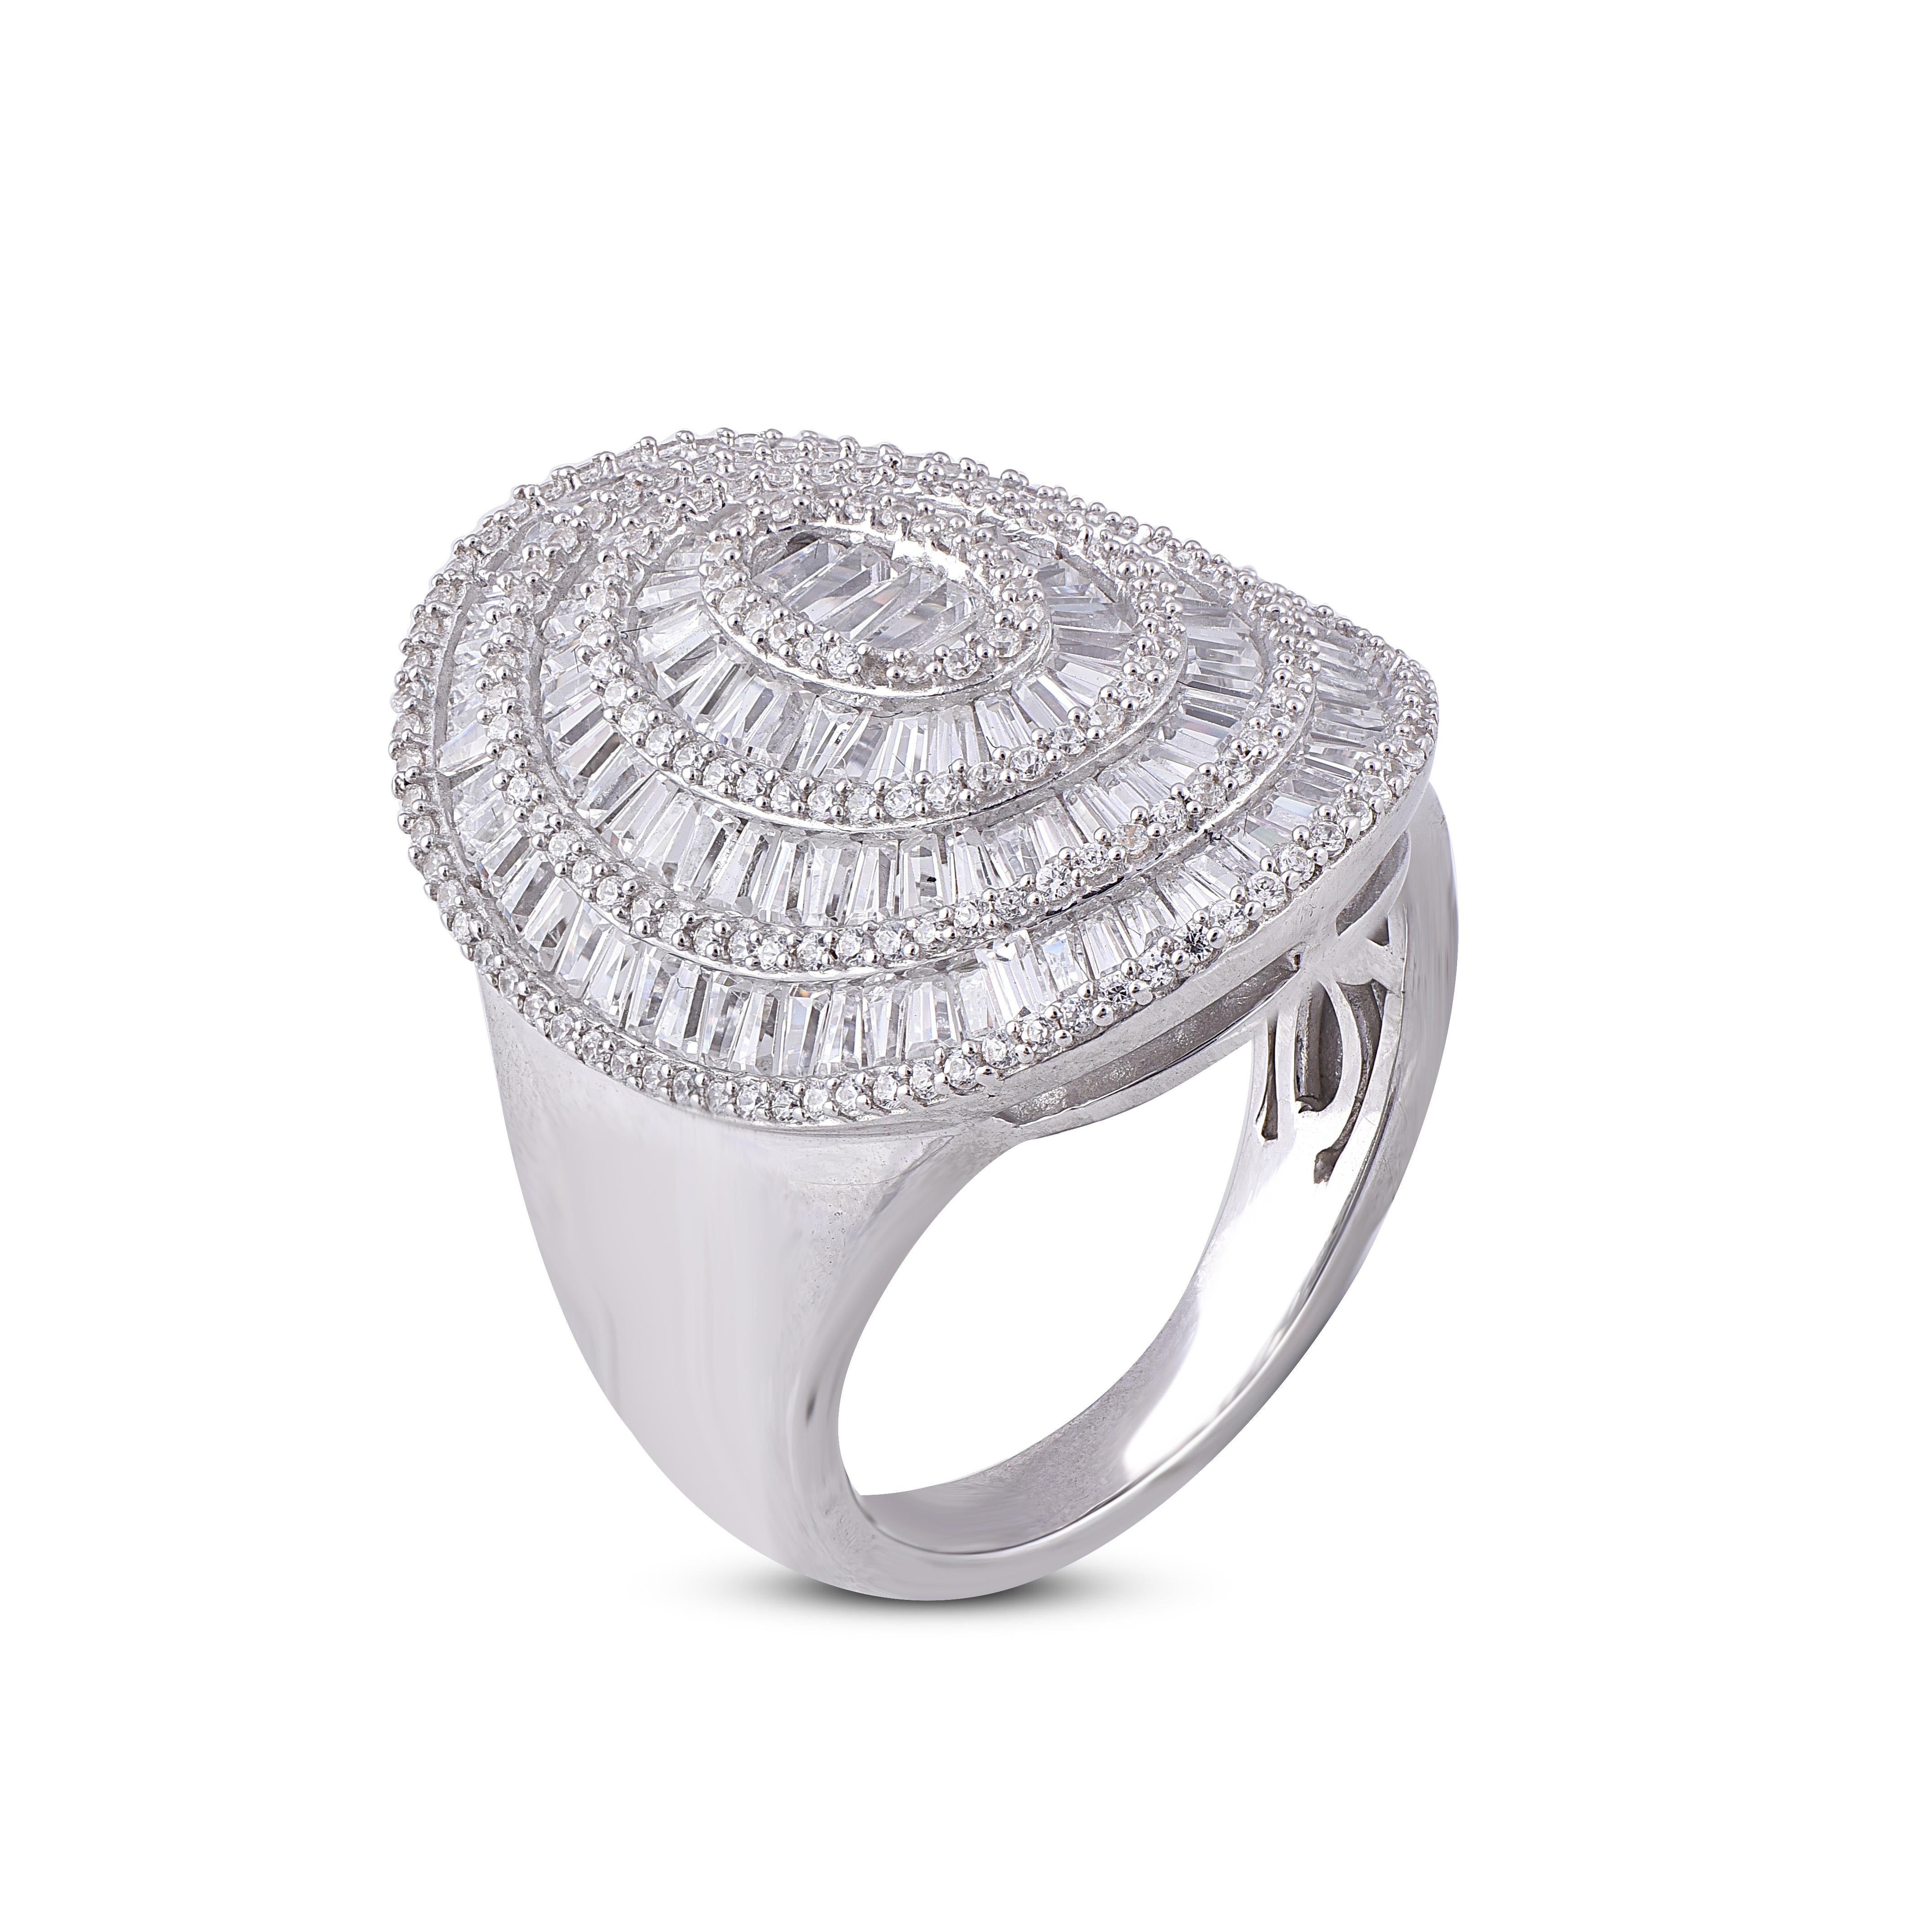 Truly exquisite, this Designer diamond disc ring is sure to be admired for the inherent classic beauty and elegance within its design. This engagement ring features 2.00 carat of 196 round and 143 Baguette diamond studded in prong and channel